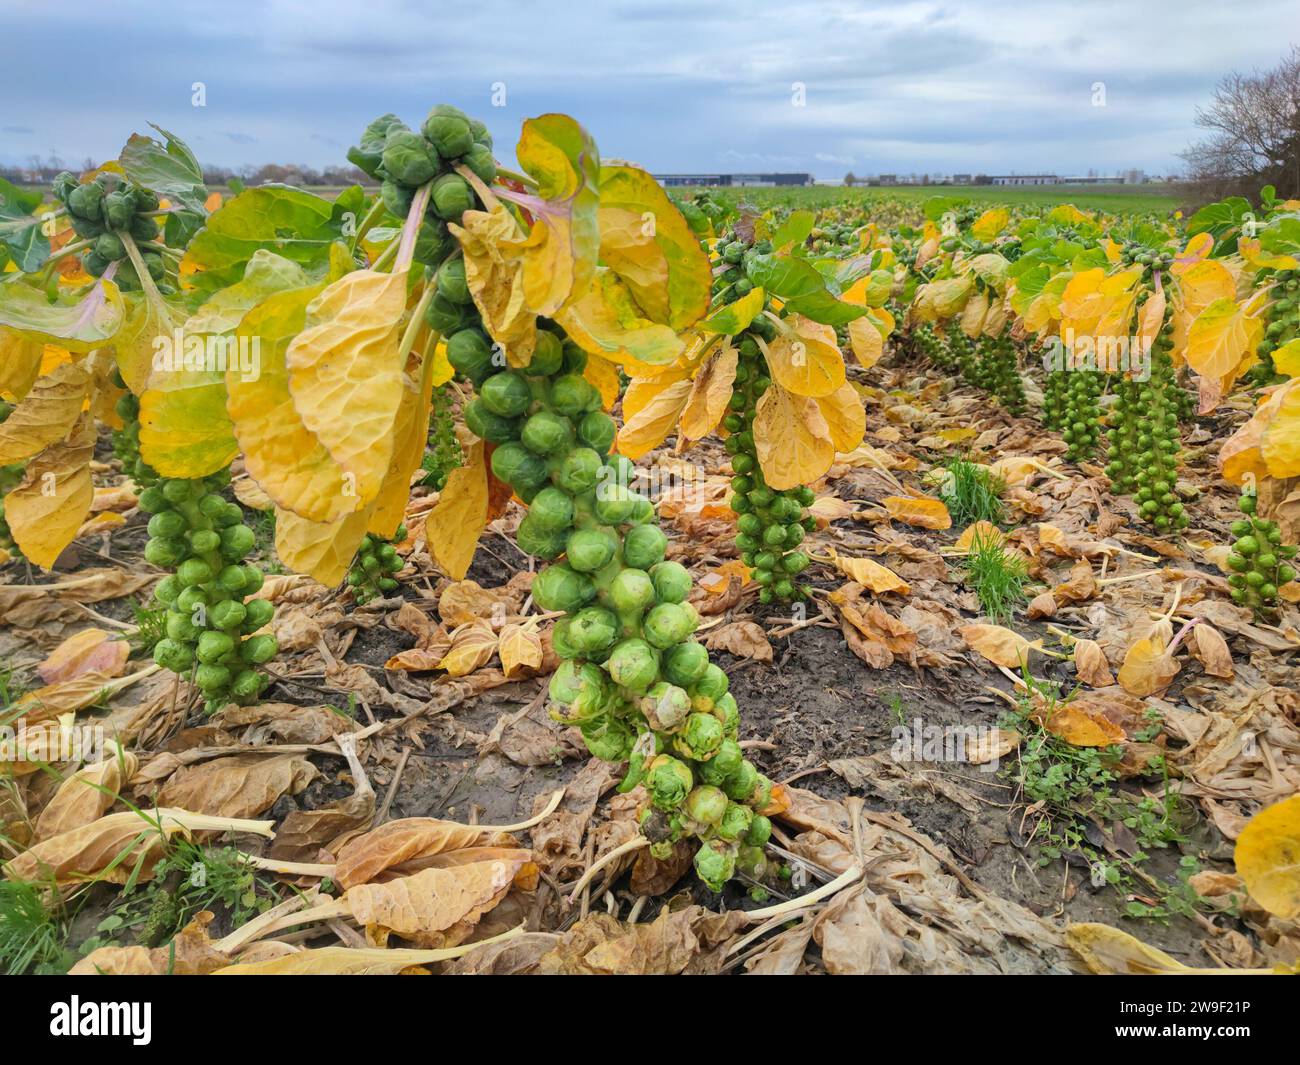 Brussels sprout stalks not yet harvested in early winter. Stock Photo